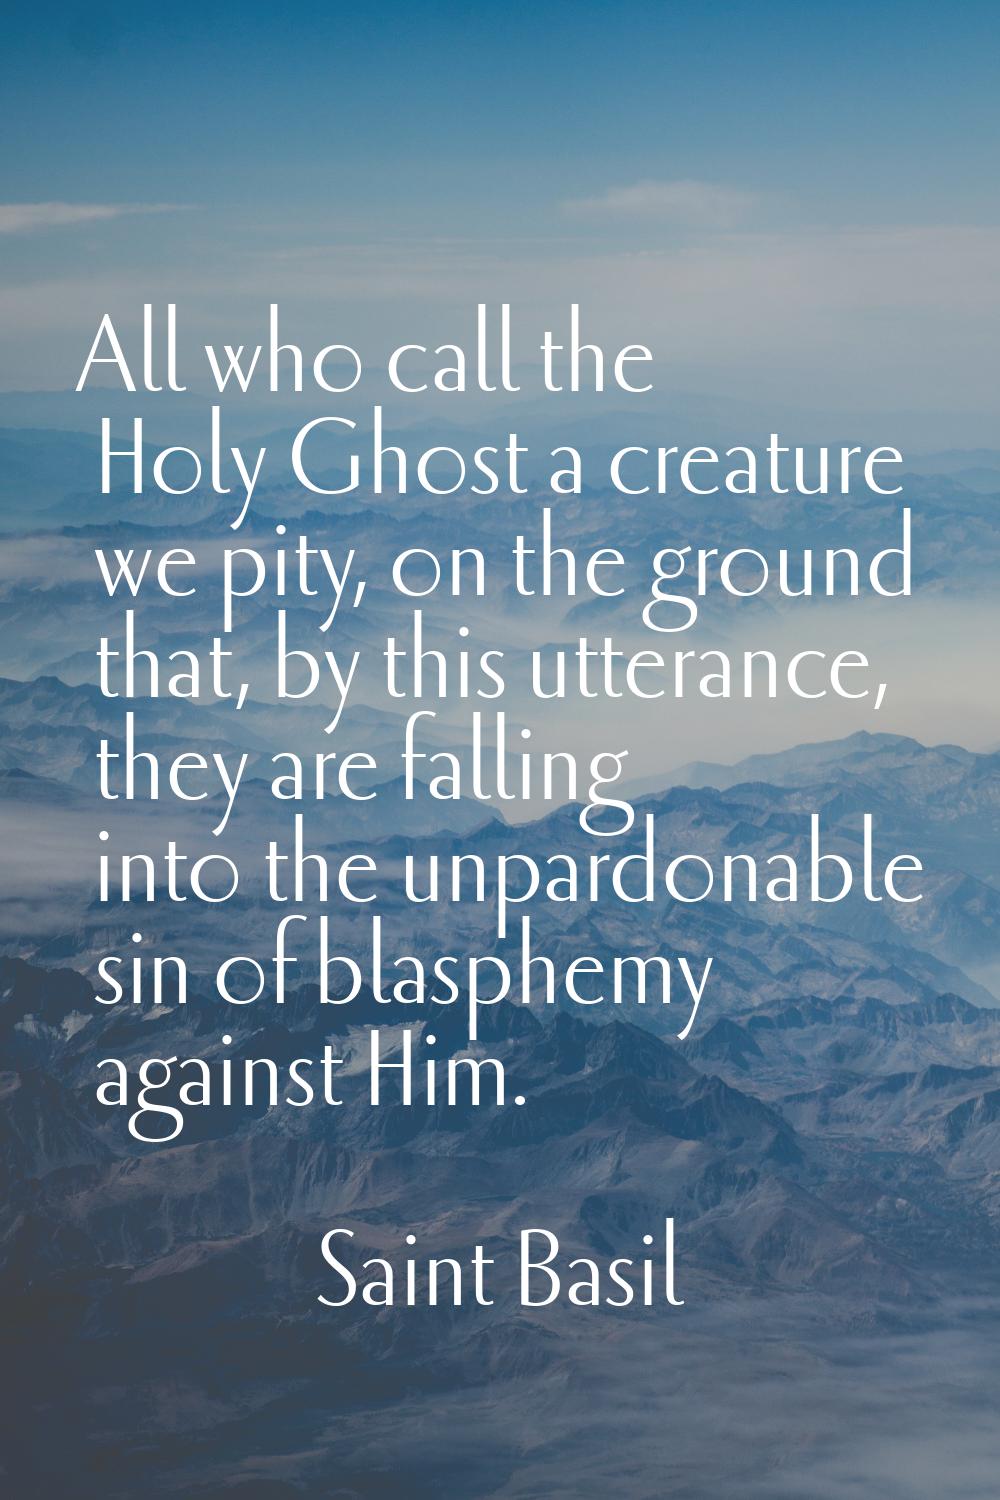 All who call the Holy Ghost a creature we pity, on the ground that, by this utterance, they are fal